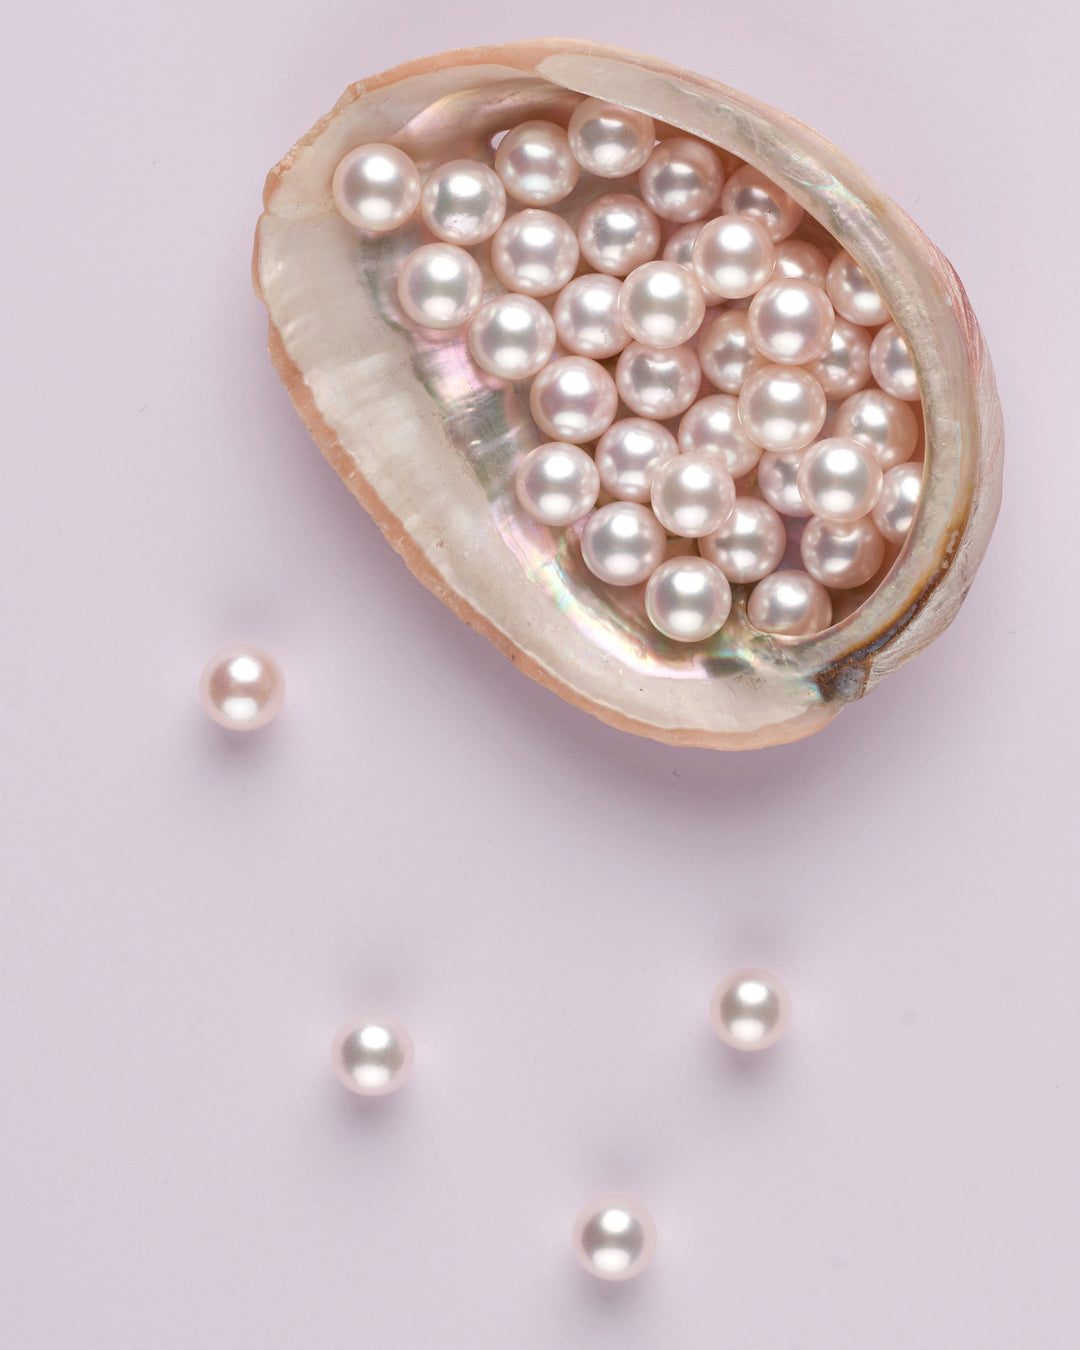 What Are Pearls Worth? - Pure Pearls